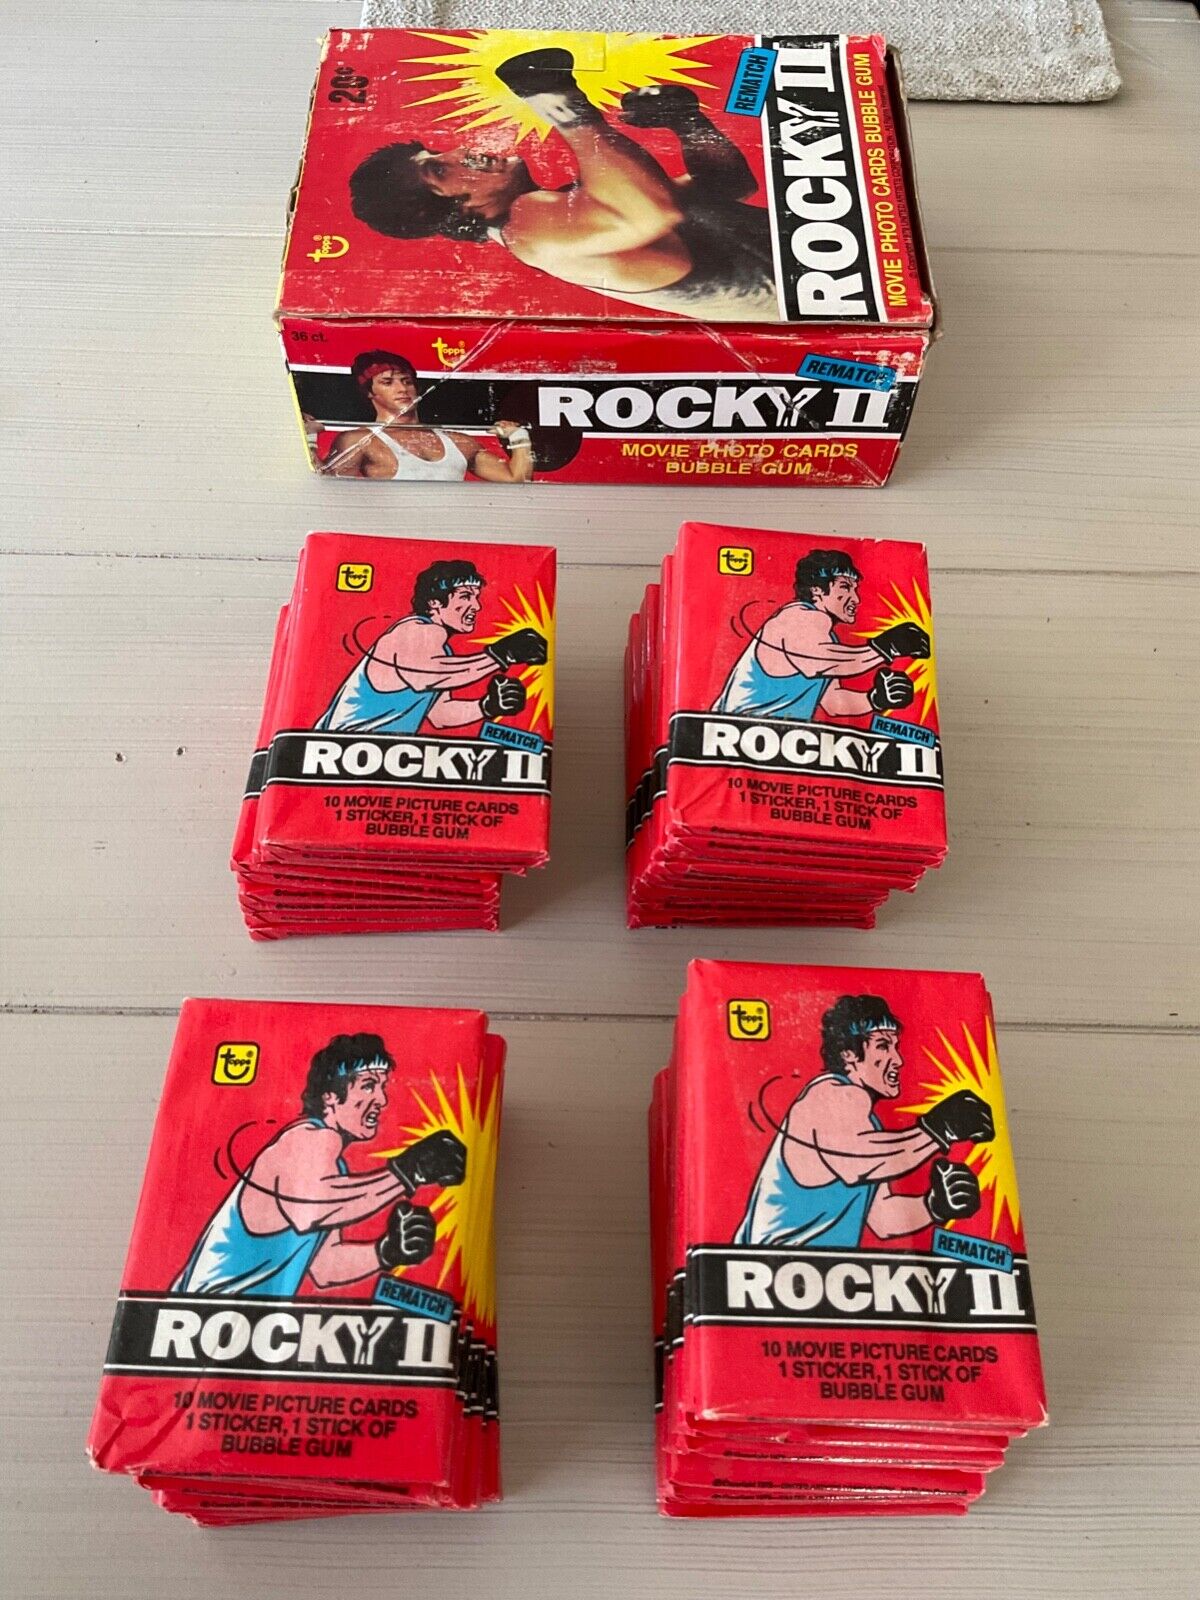 1979 Topps ROCKY II Movie Trading Cards - Sealed Wax Pack